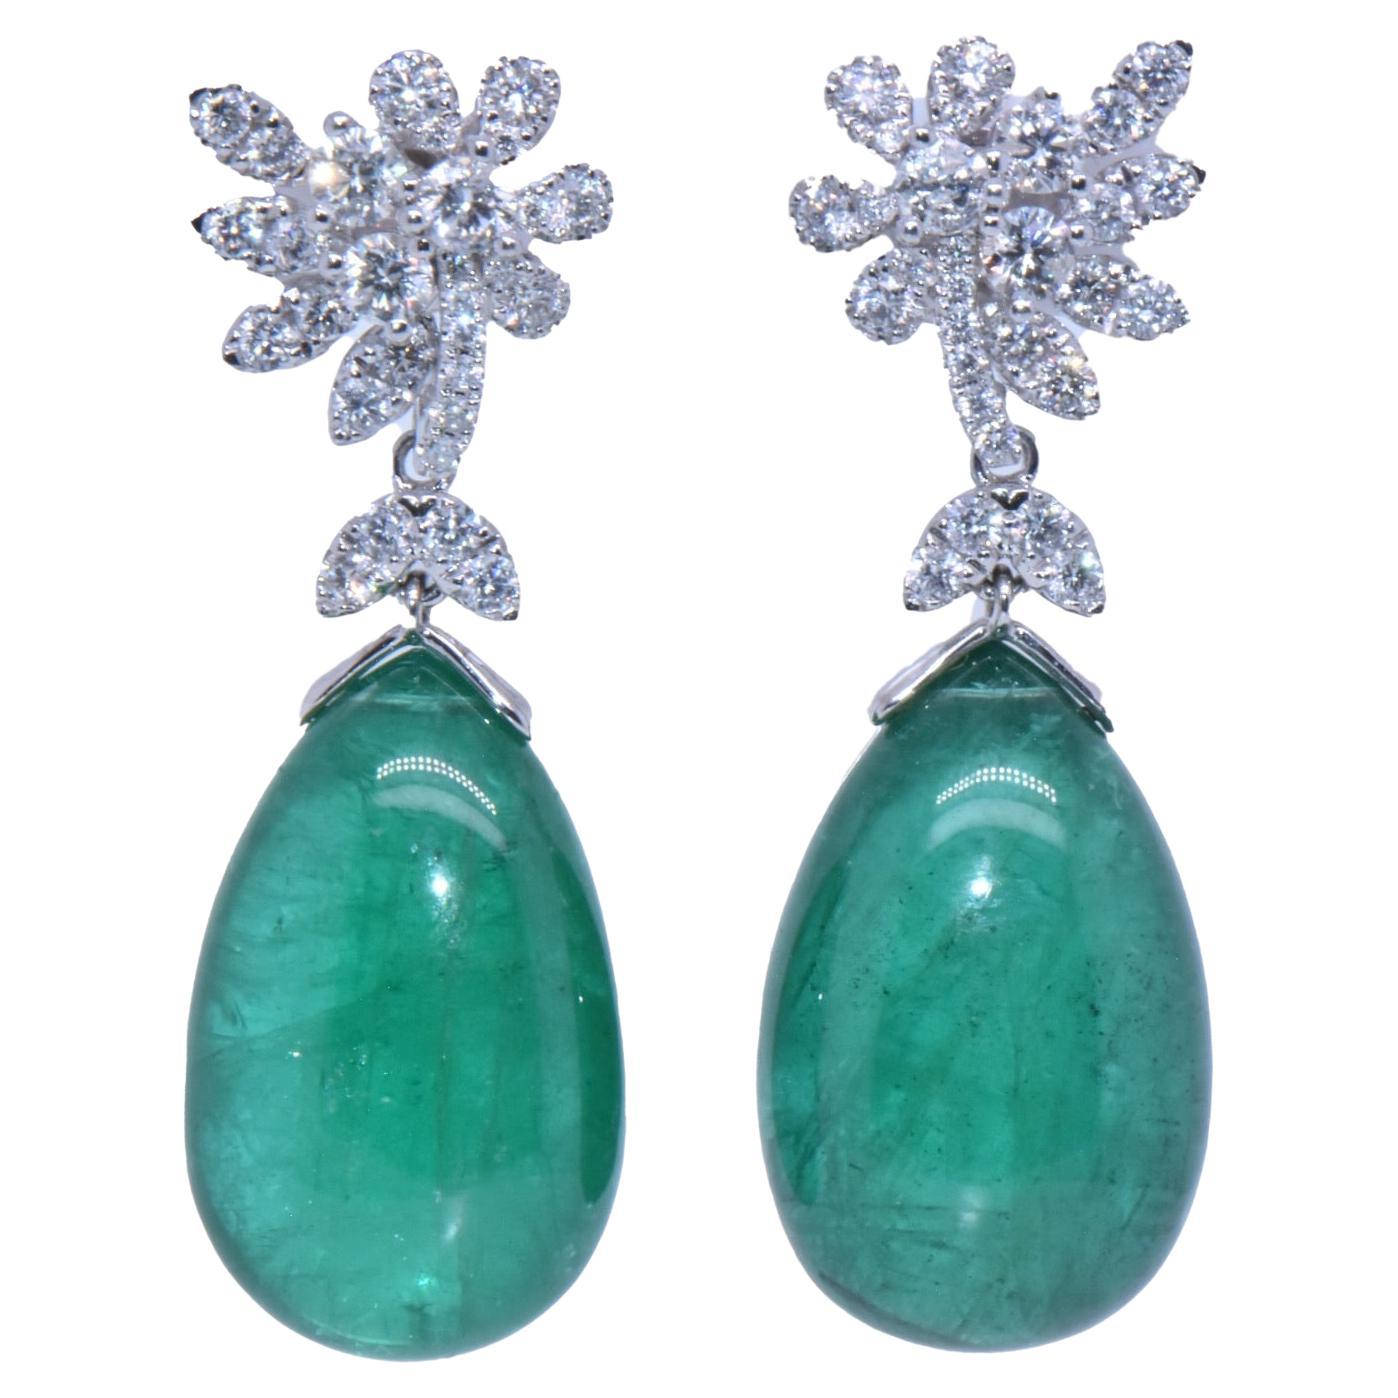 47.41 Carat Emerald Drop Earrings with Diamond Flower Design in 18k White Gold For Sale